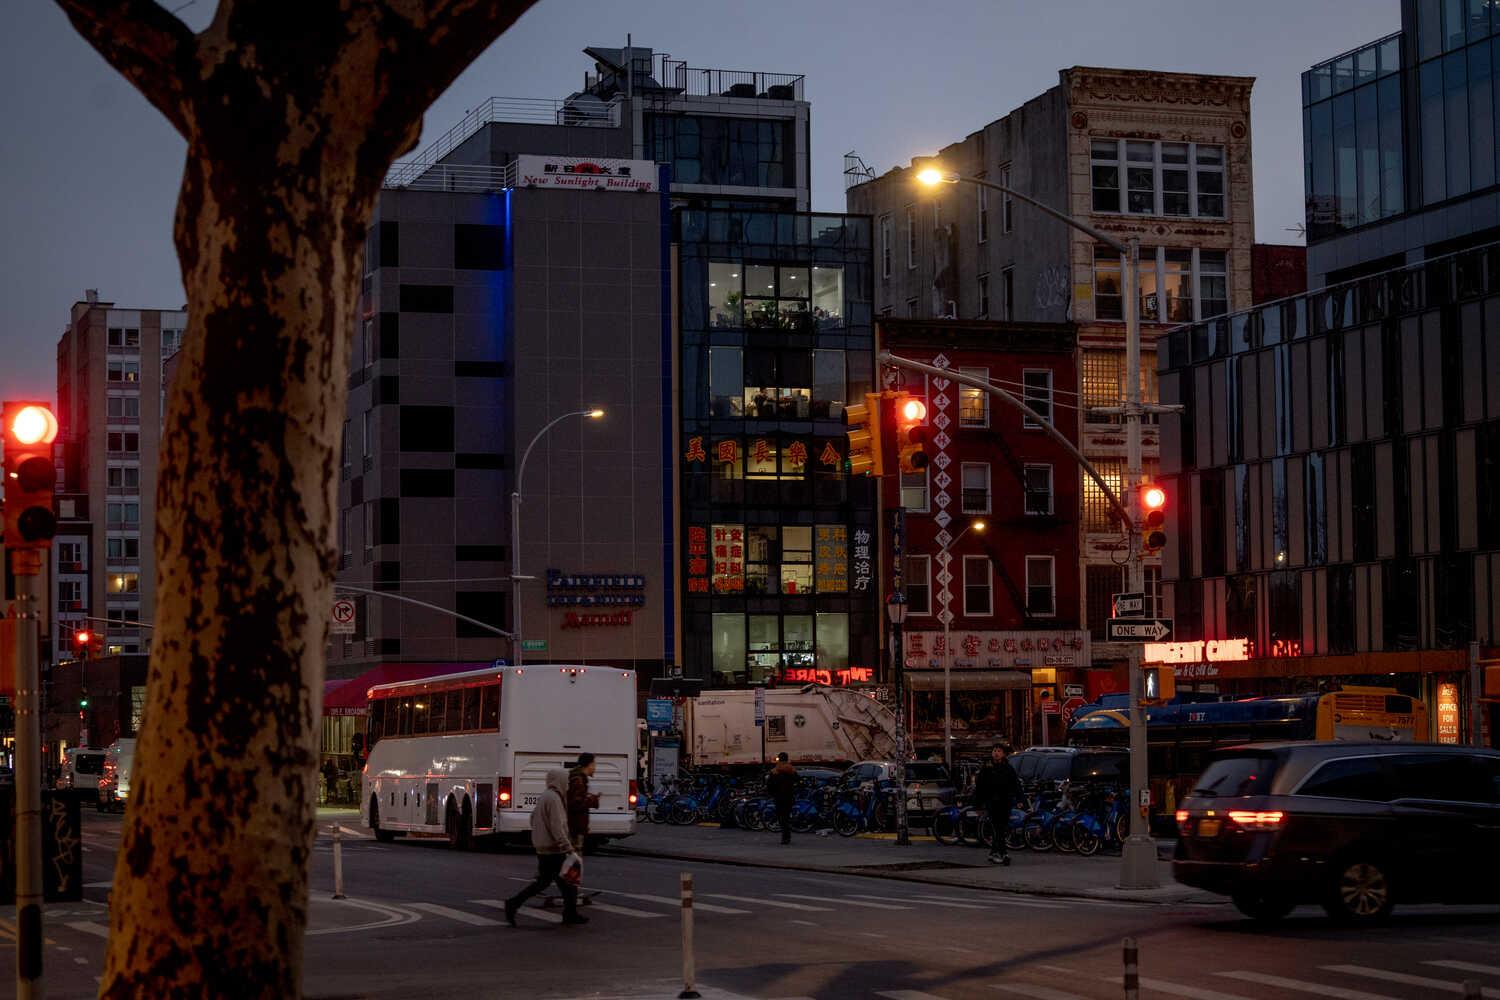 A suspected Chinese police outpost in New York City’s Chinatown.